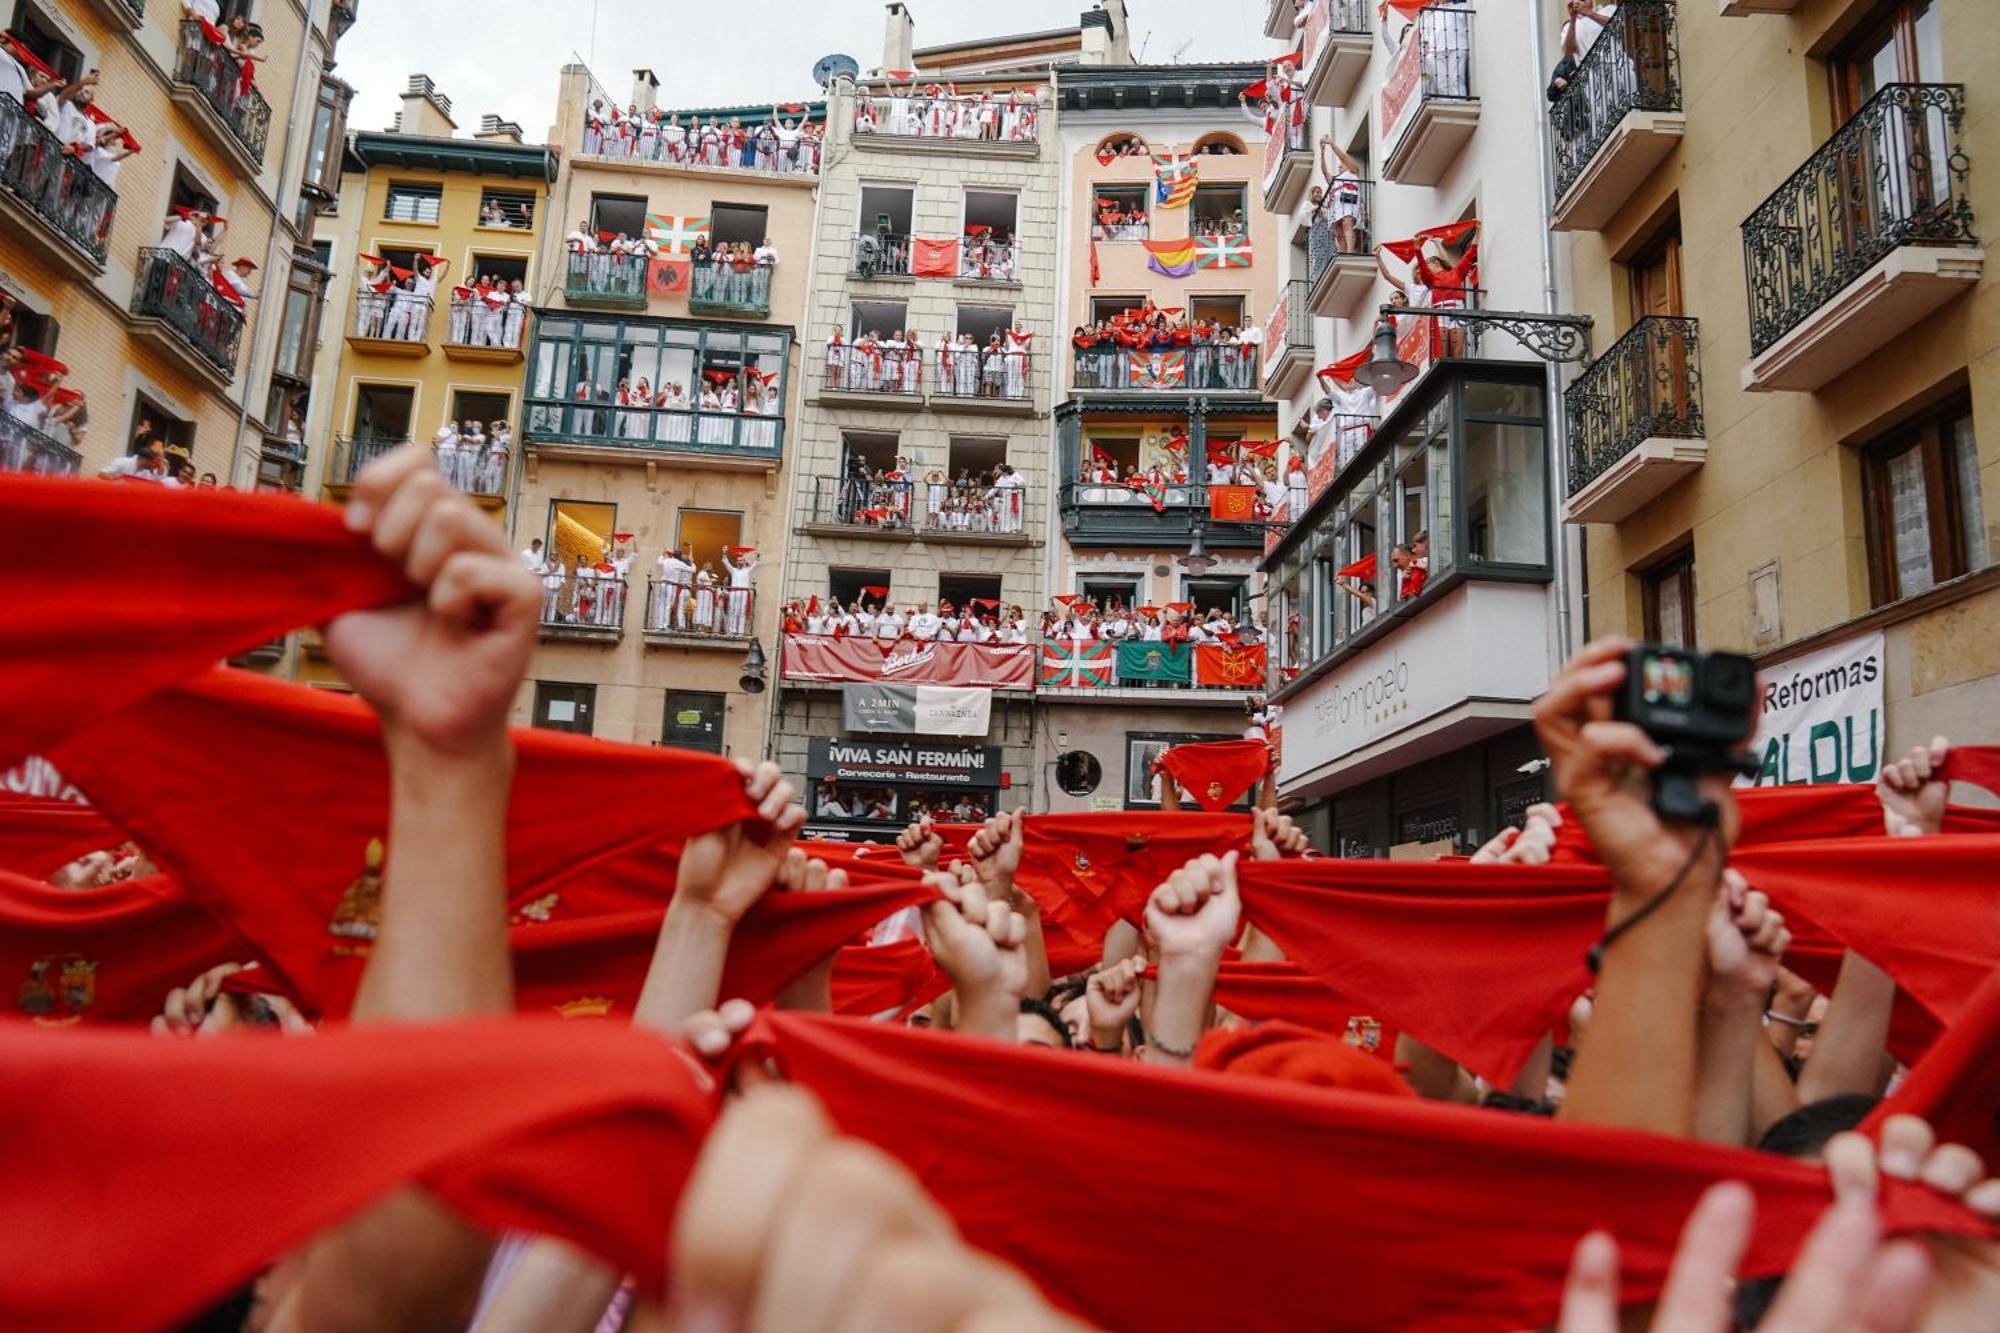 Running Of The Bulls All Inclusive Camping Pamplona Exterior photo